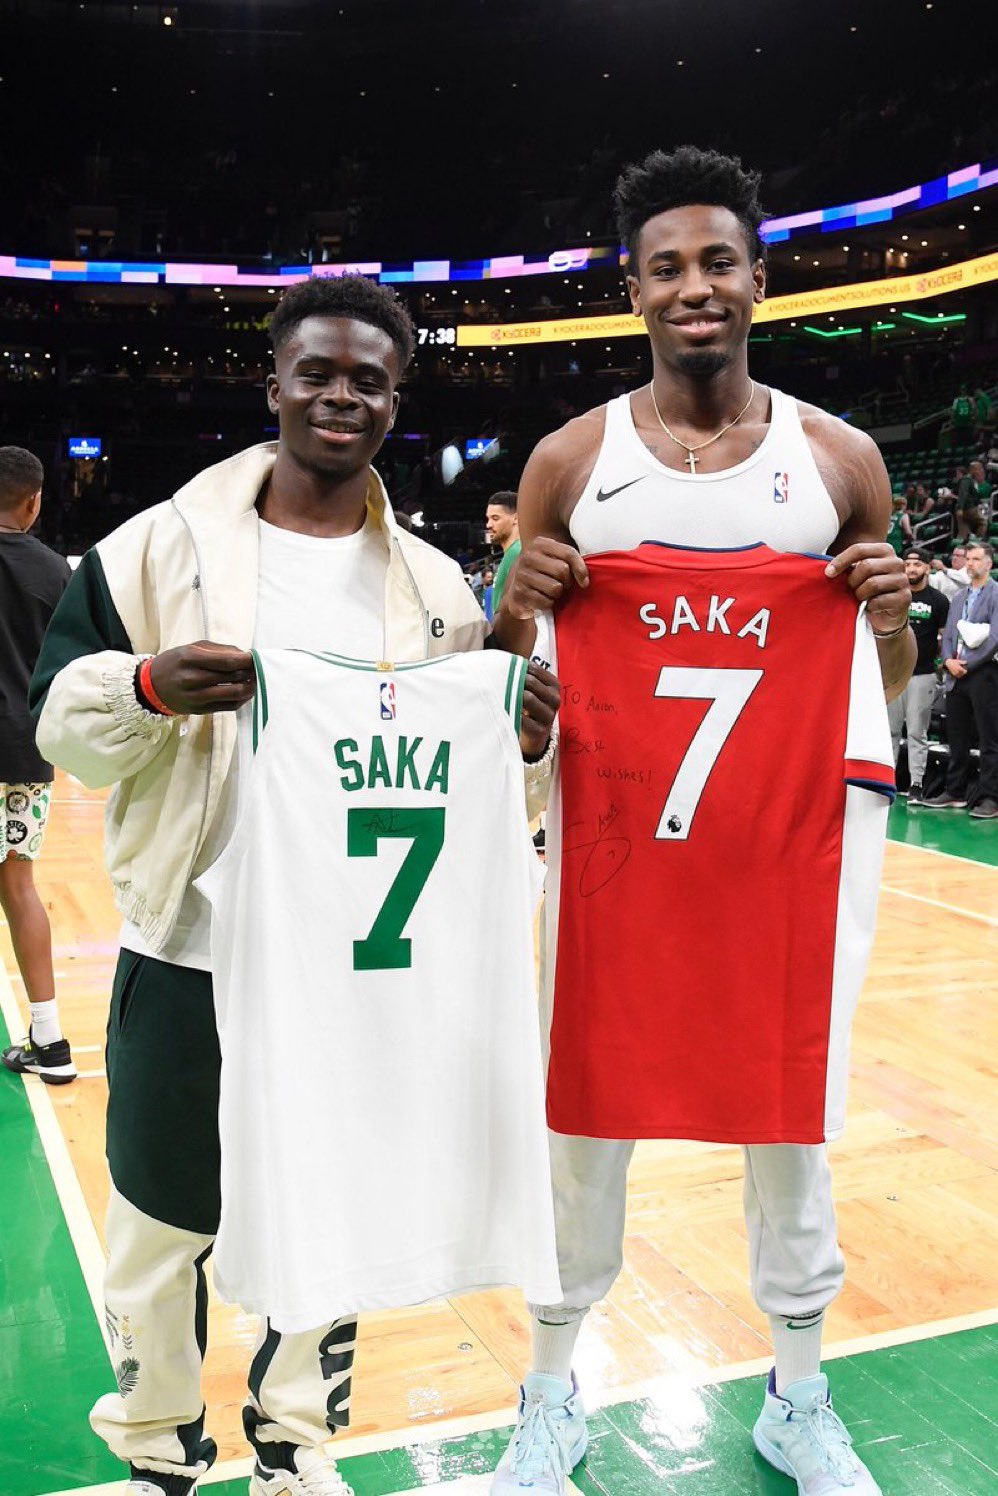 aims on X: "from nesmith to jaylen brown…. saka prayed for times like this  https://t.co/97C1X0WR4o" / X